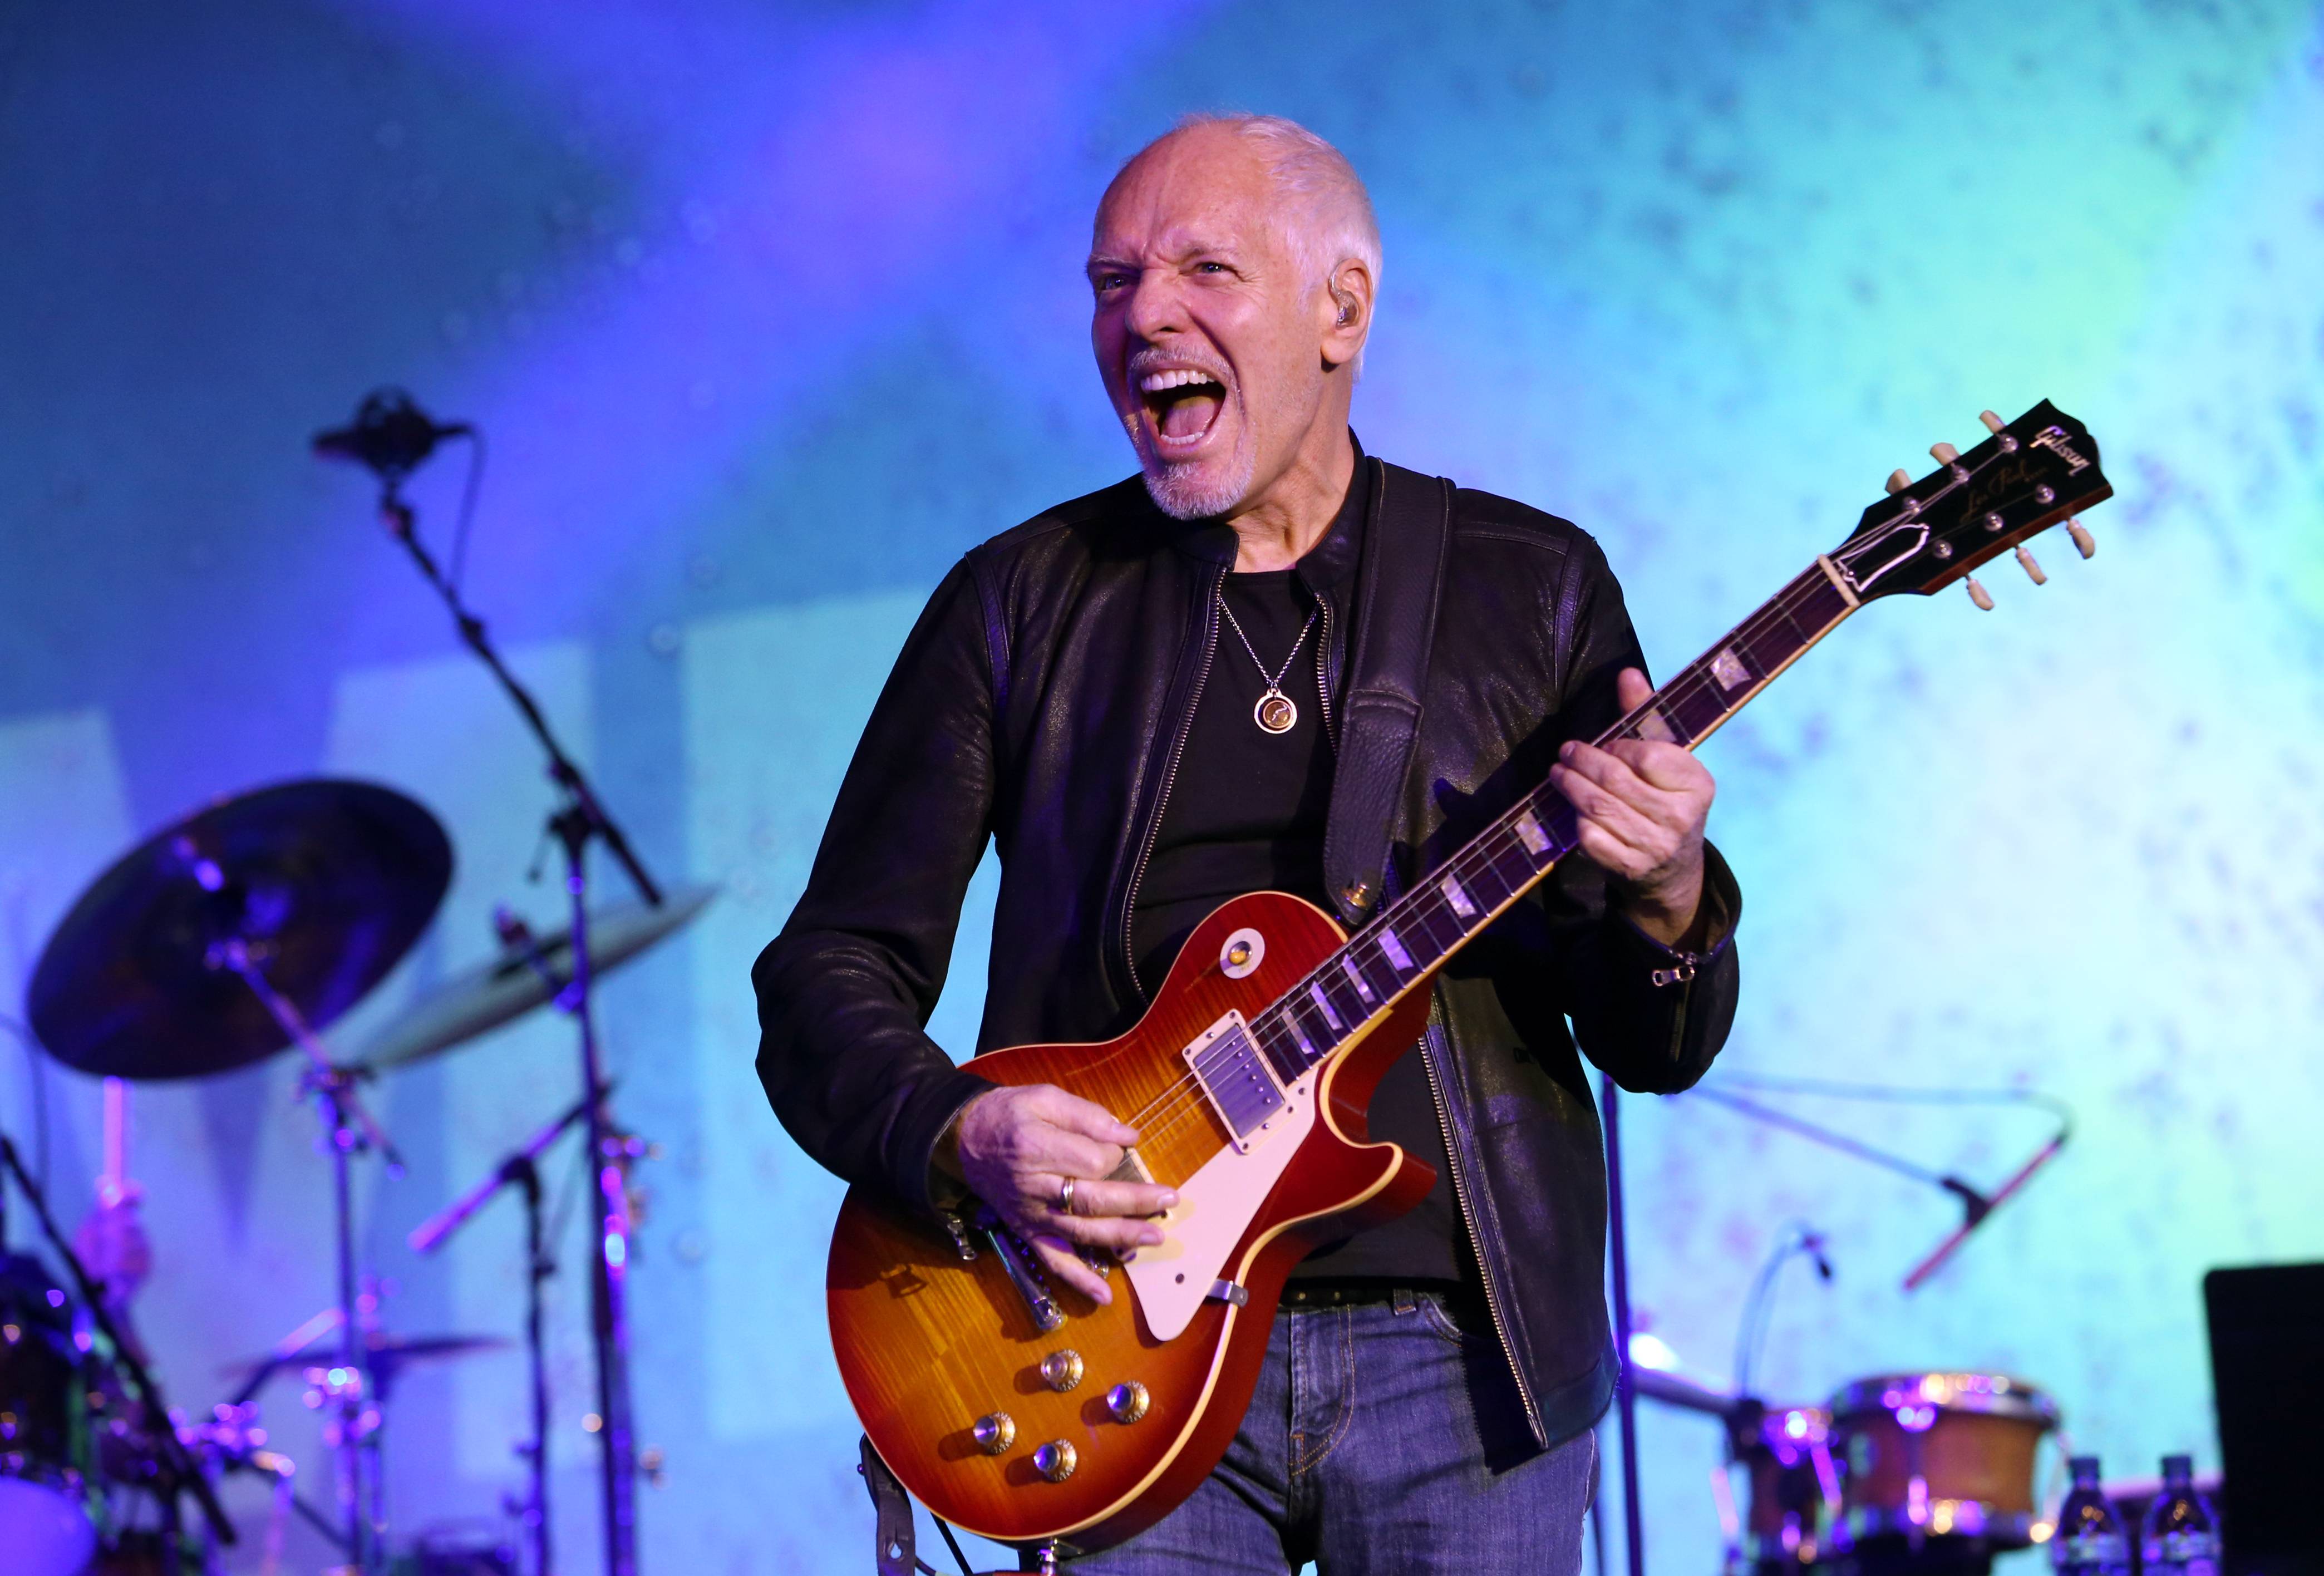 Peter Frampton performs onstage at the TEC Awards during the 2019 NAMM Show at the Hilton Anaheim on Jan. 26, 2019, in Anaheim, Calif.